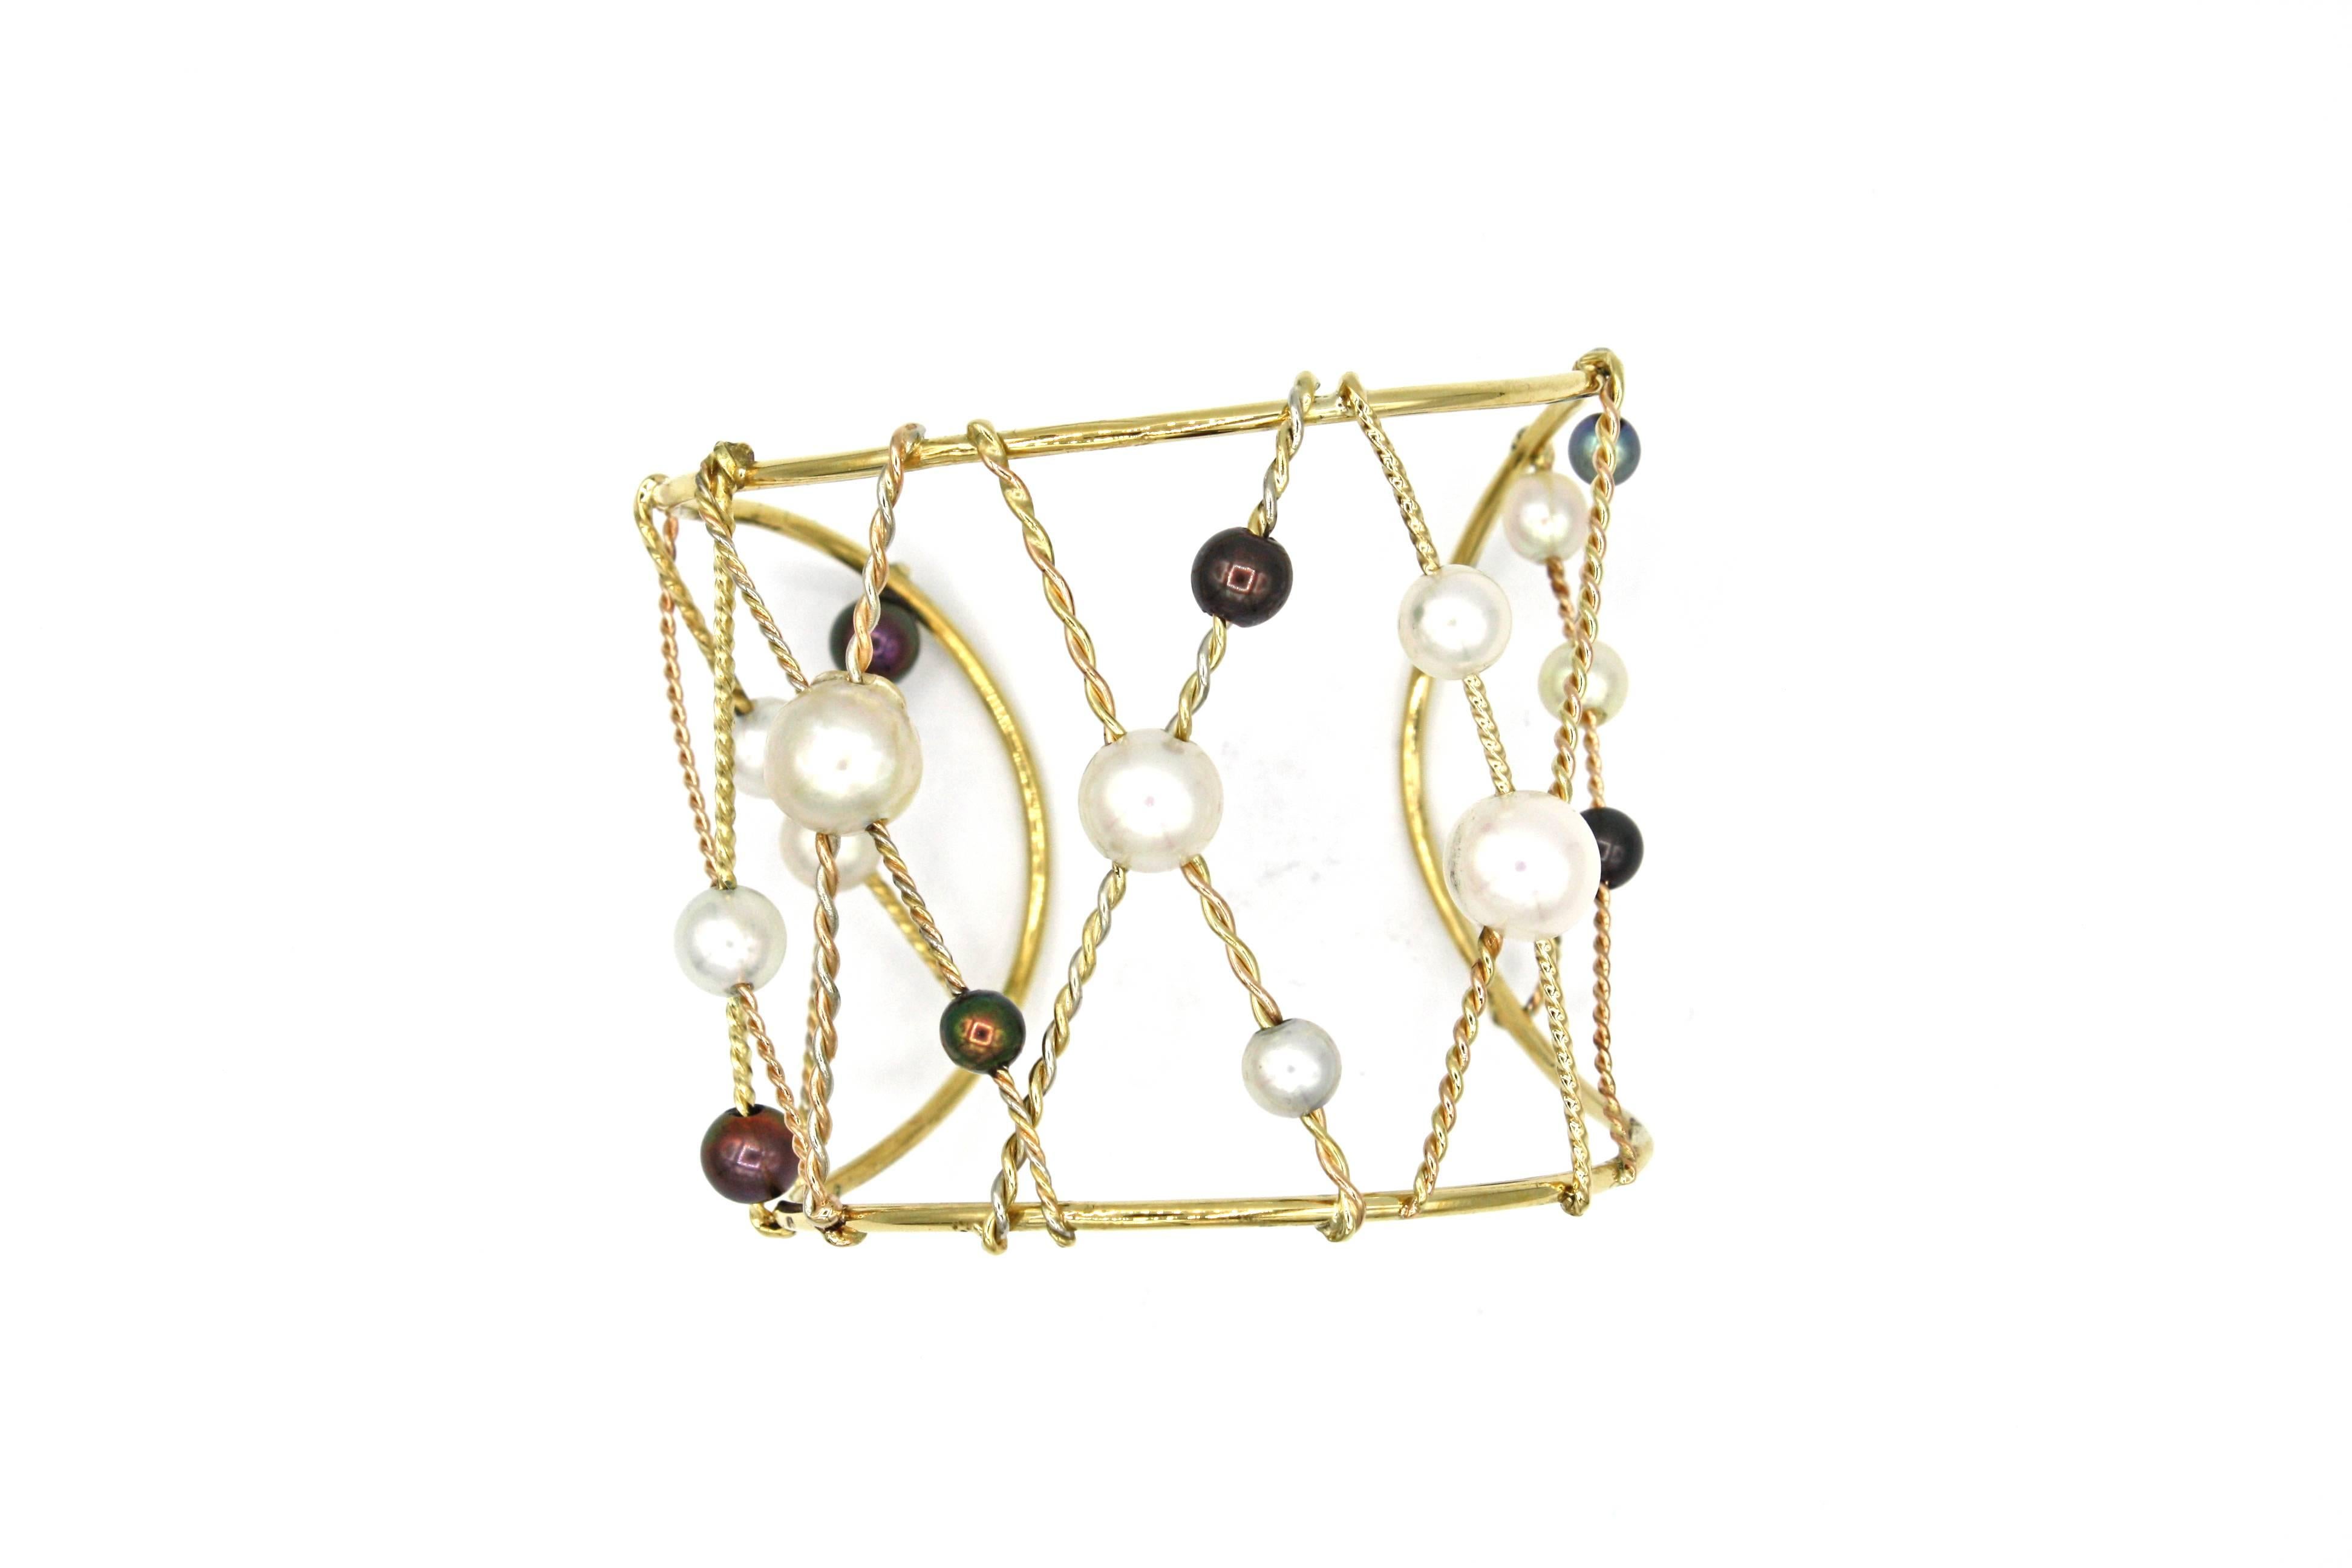 This elegant cuff bracelet is made of 18k yellow, rose, and white gold intertwined to appear like rope along with 16 South Sea pearls in varying colors.